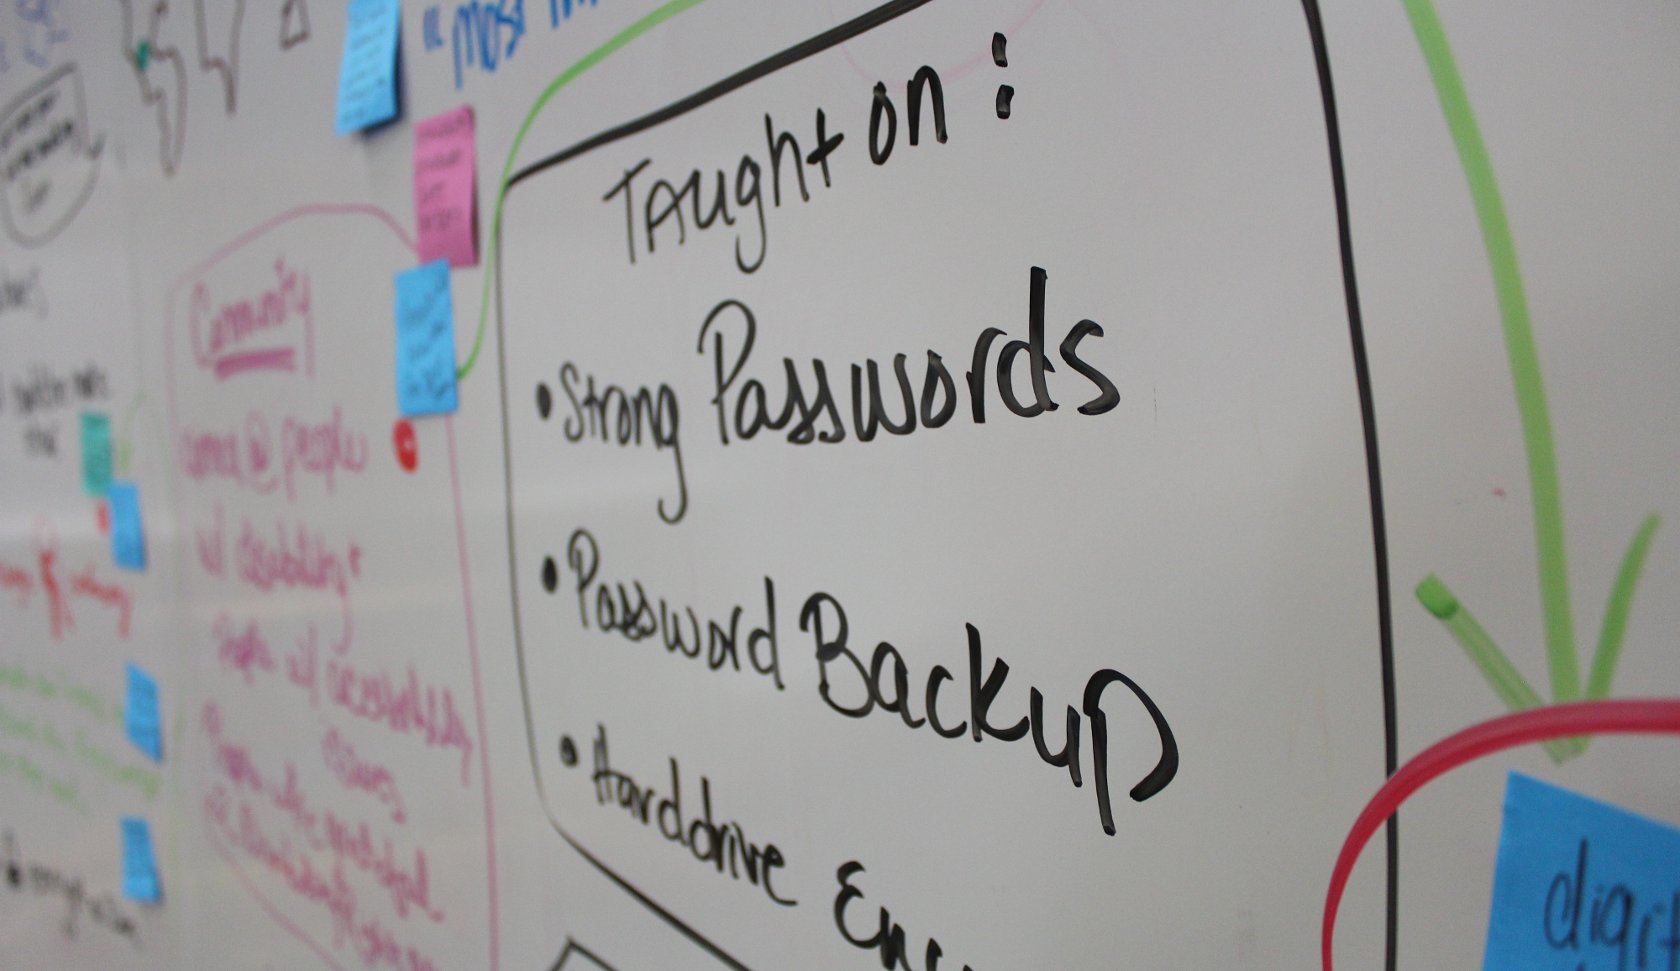 Notes on strong passwords and laptop security from the UXForum